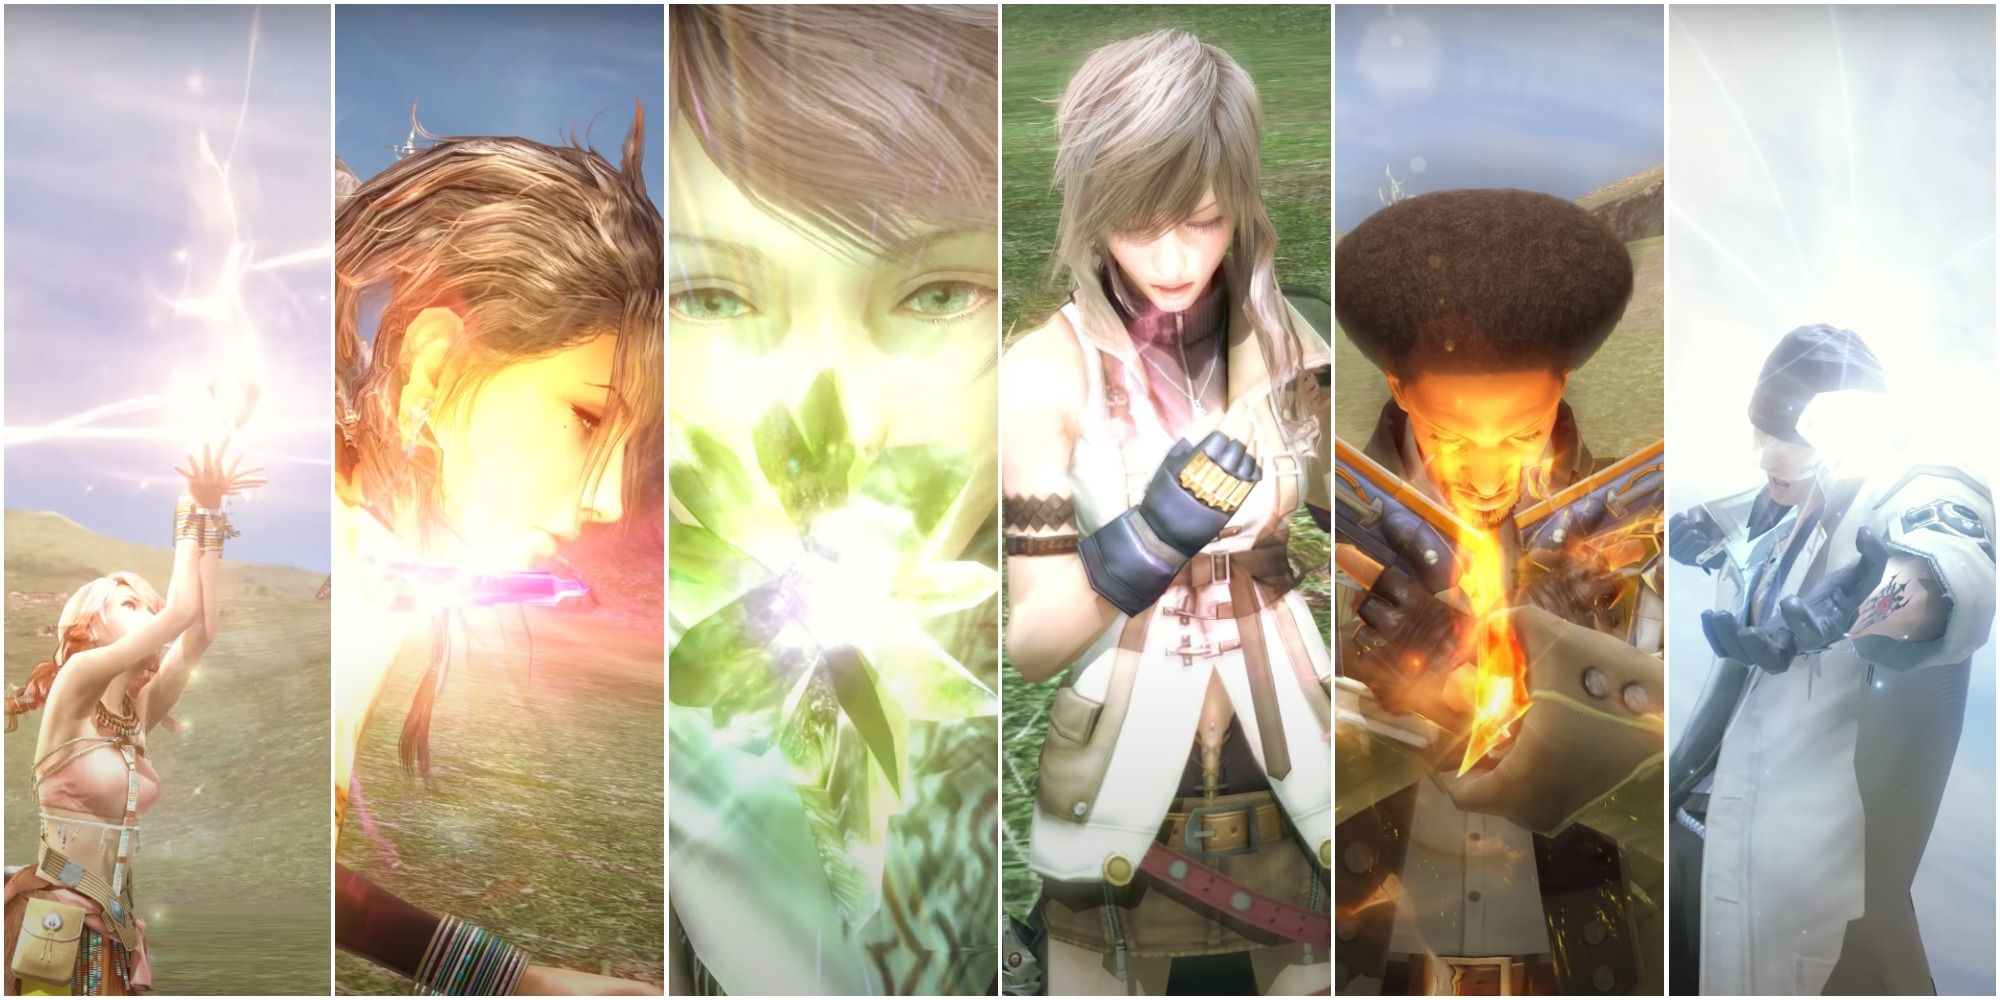 Vanille, Fang, Hope, Lightning, Sazh and Snow from Final Fantasy 13 using their Eidolon crystals, representative of their Paradigms